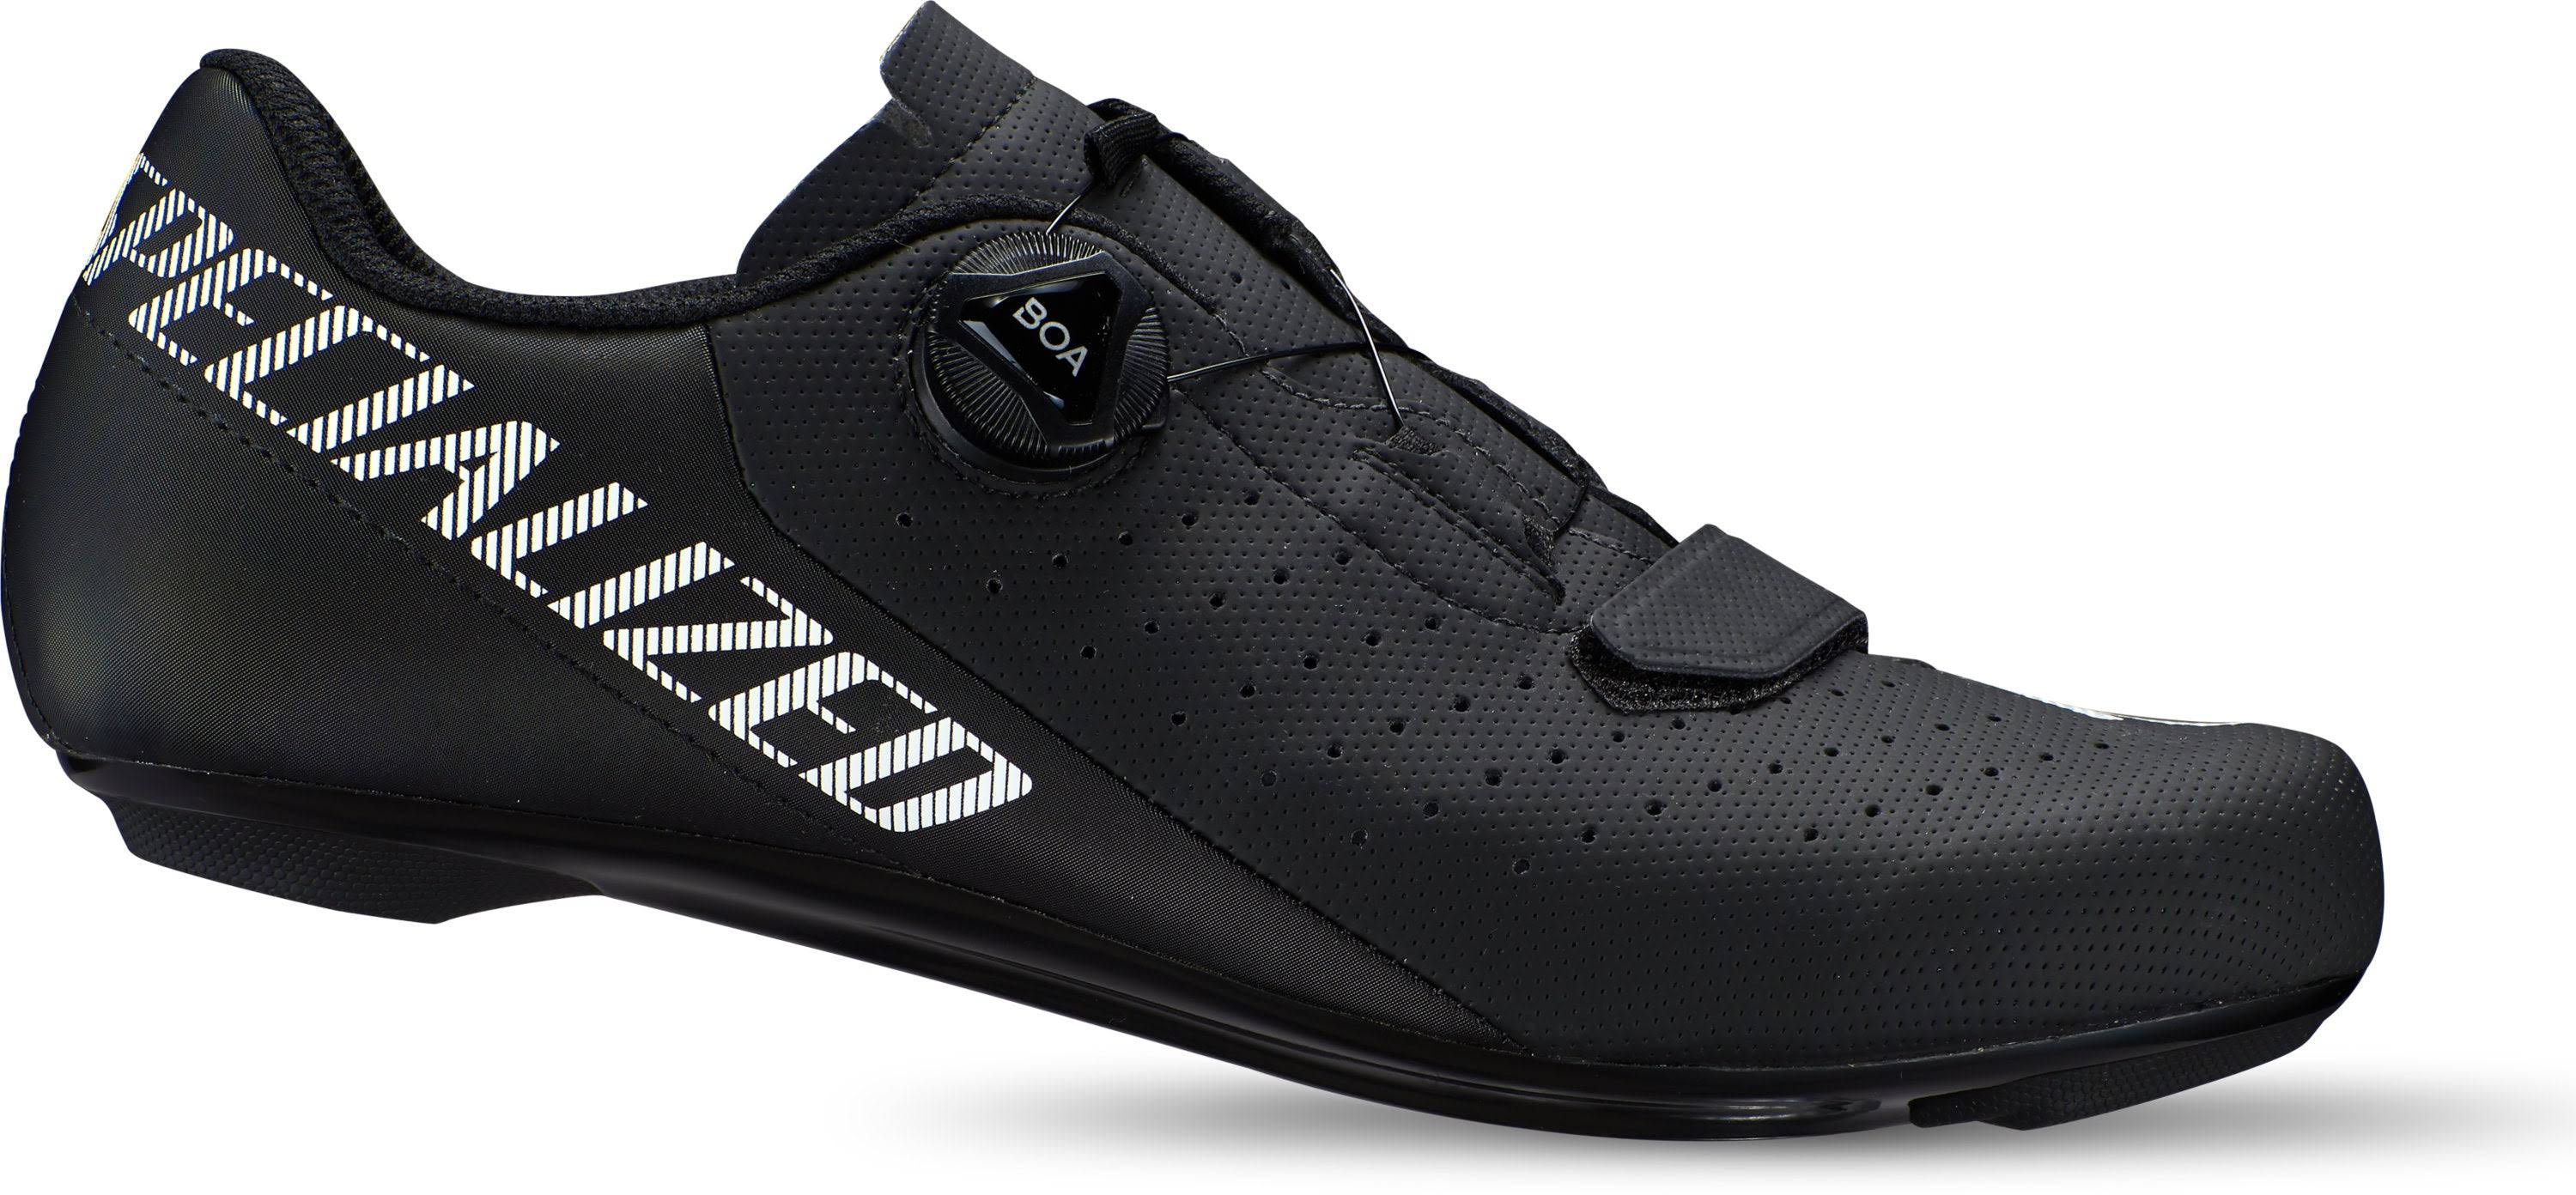 Specialized Torch 1.0 Road Cycling Shoes Black